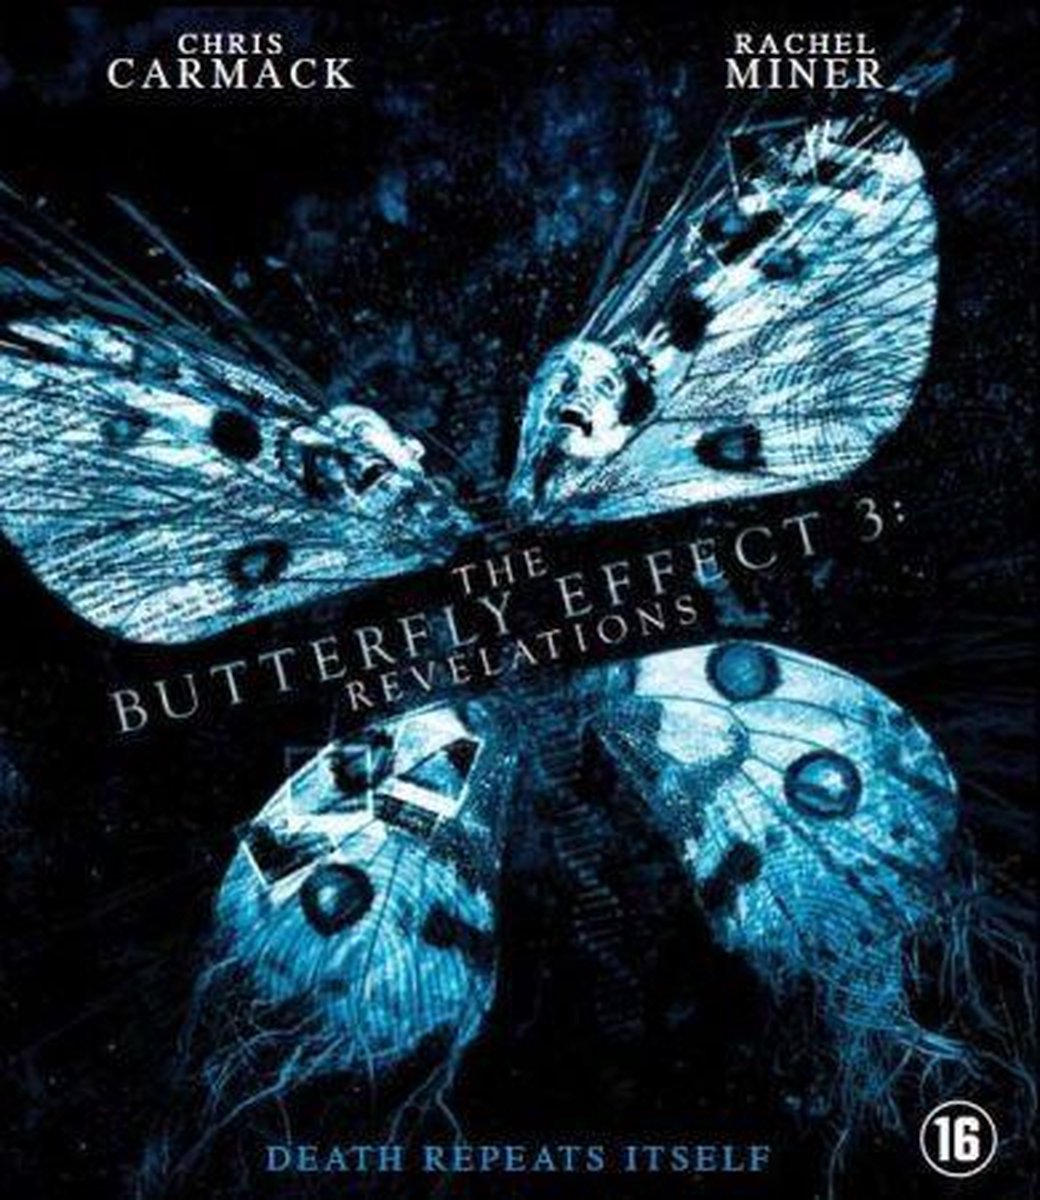 THE BUTTERFLY EFFECT 3